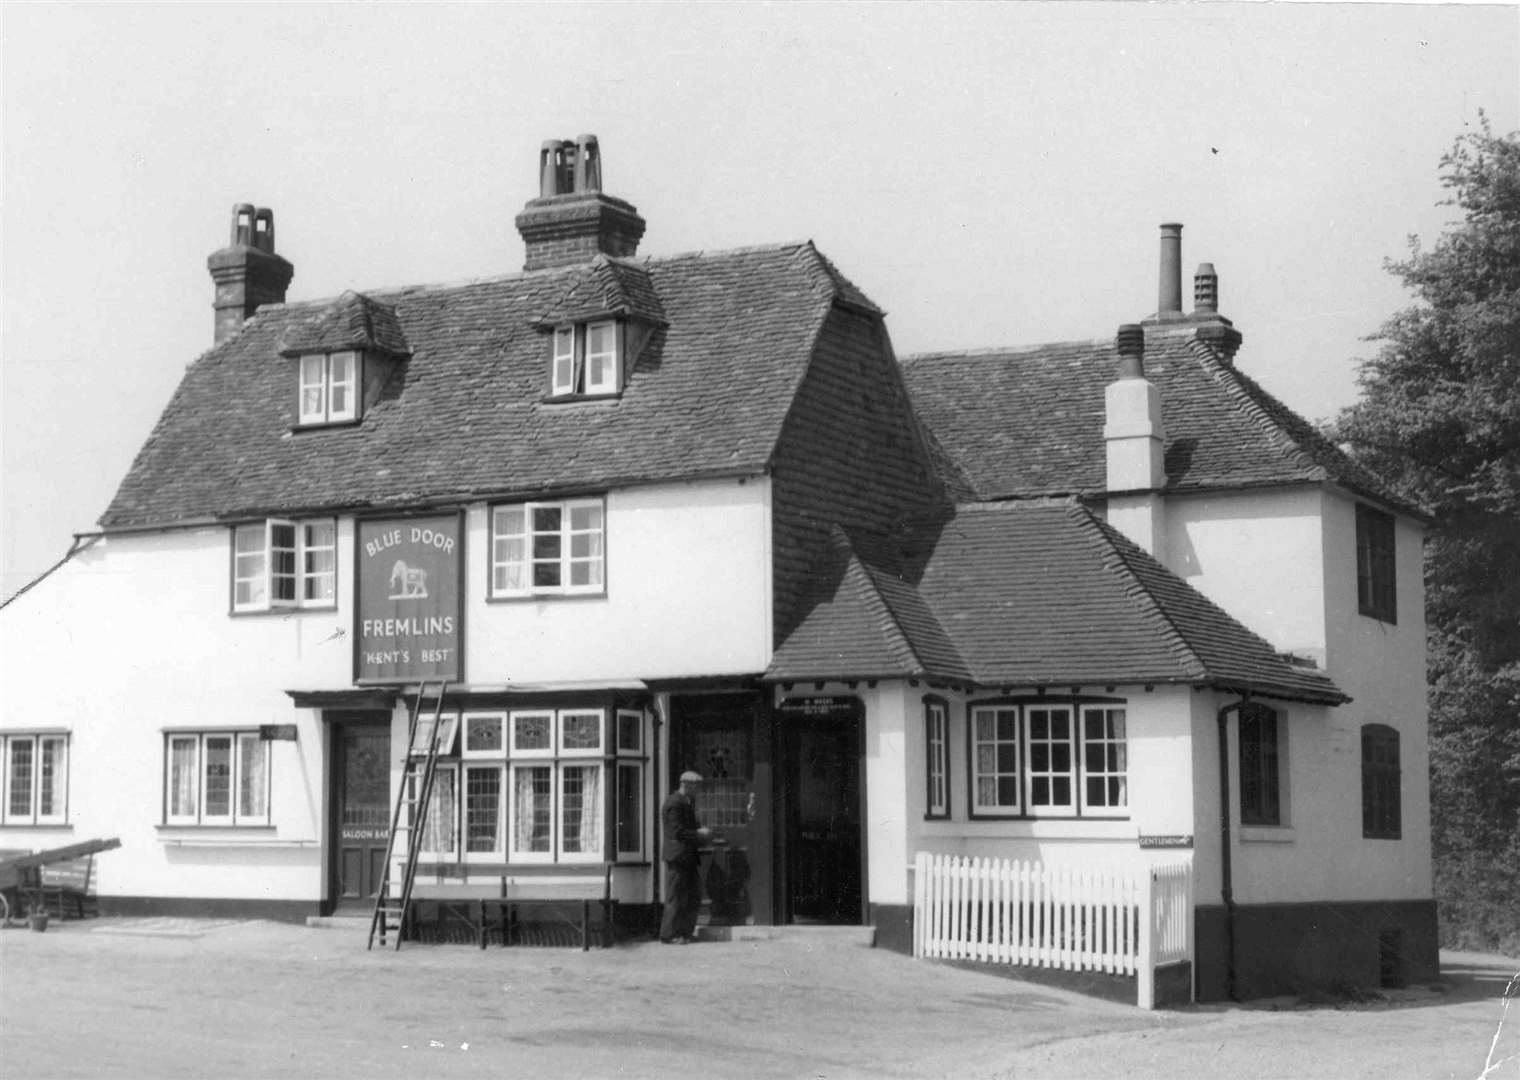 The Blue Door in Sutton Road, Maidstone. Pic taken from 'Images of Maidstone'.